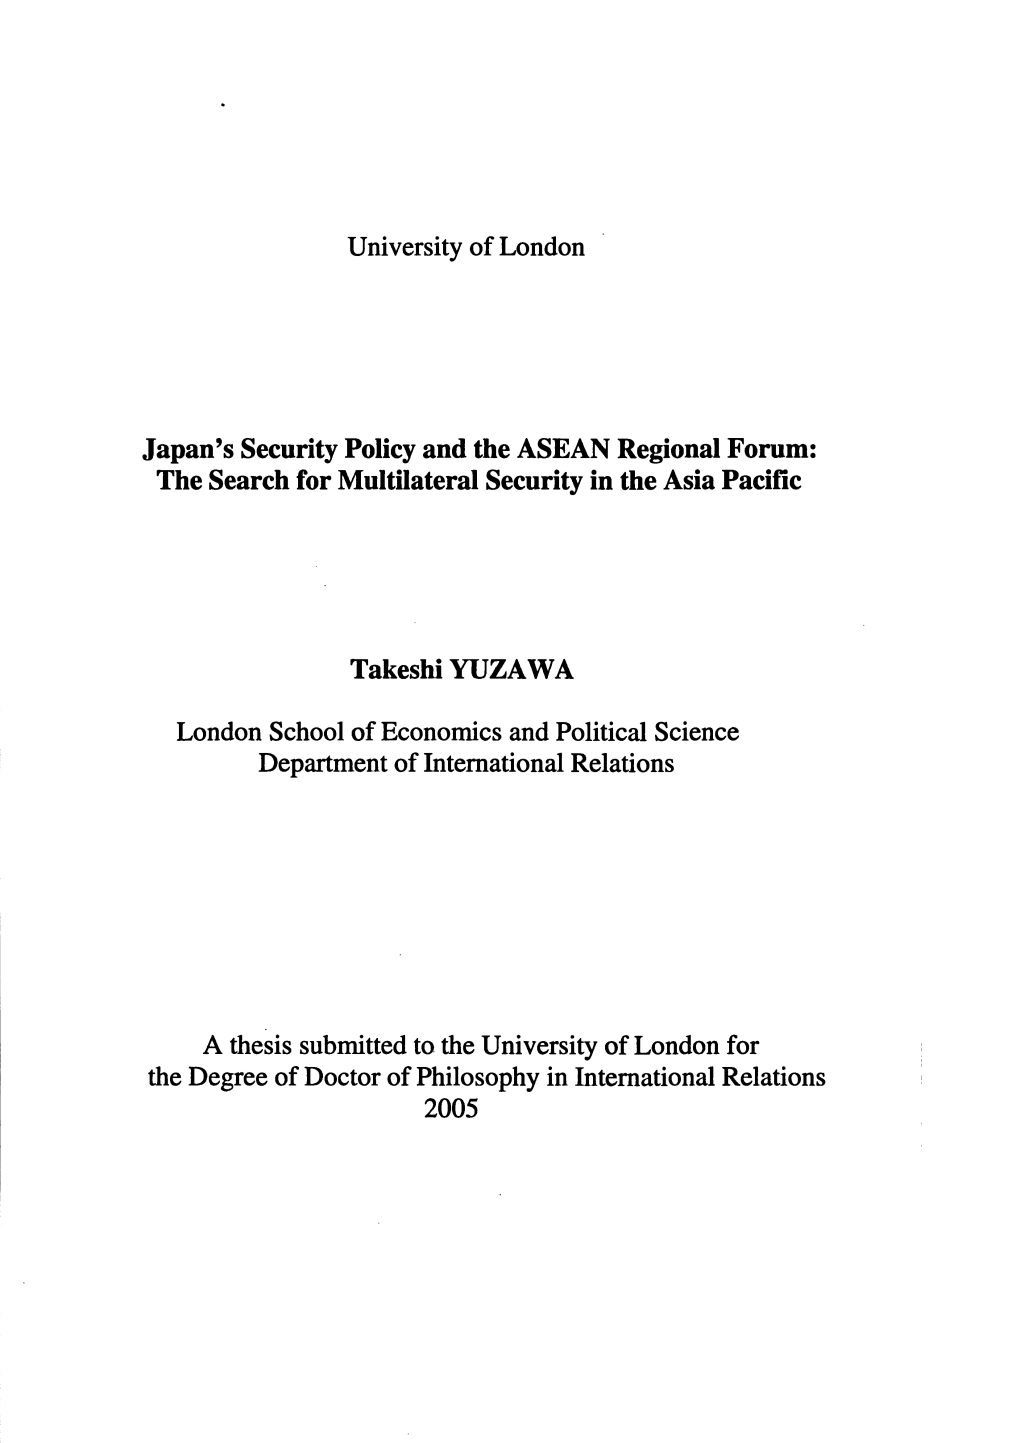 University of London Japan's Security Policy and The